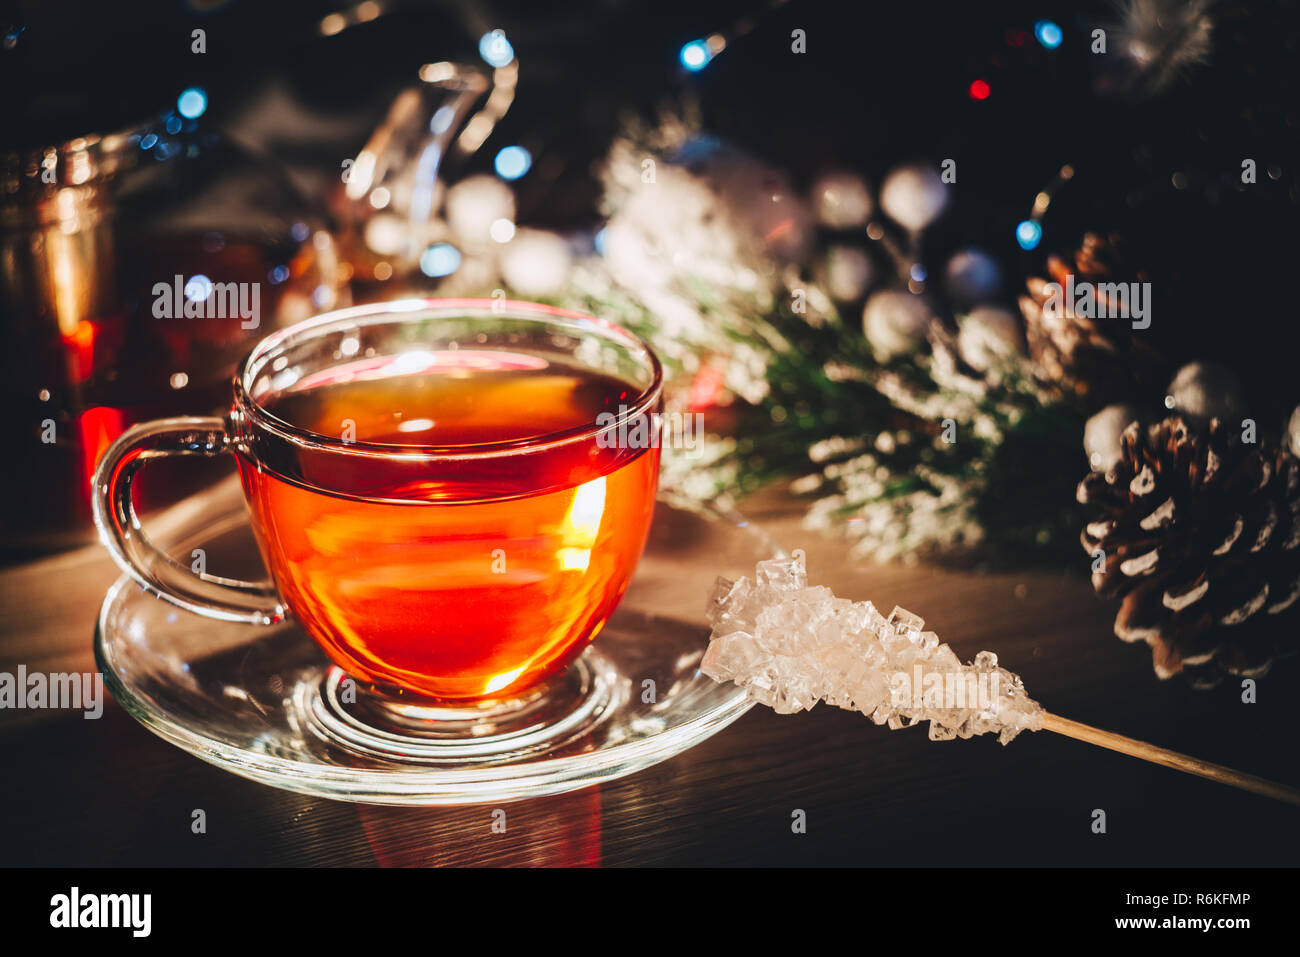 Hot glass cup of black tea on table decorated with christmas tree toys Stock Photo